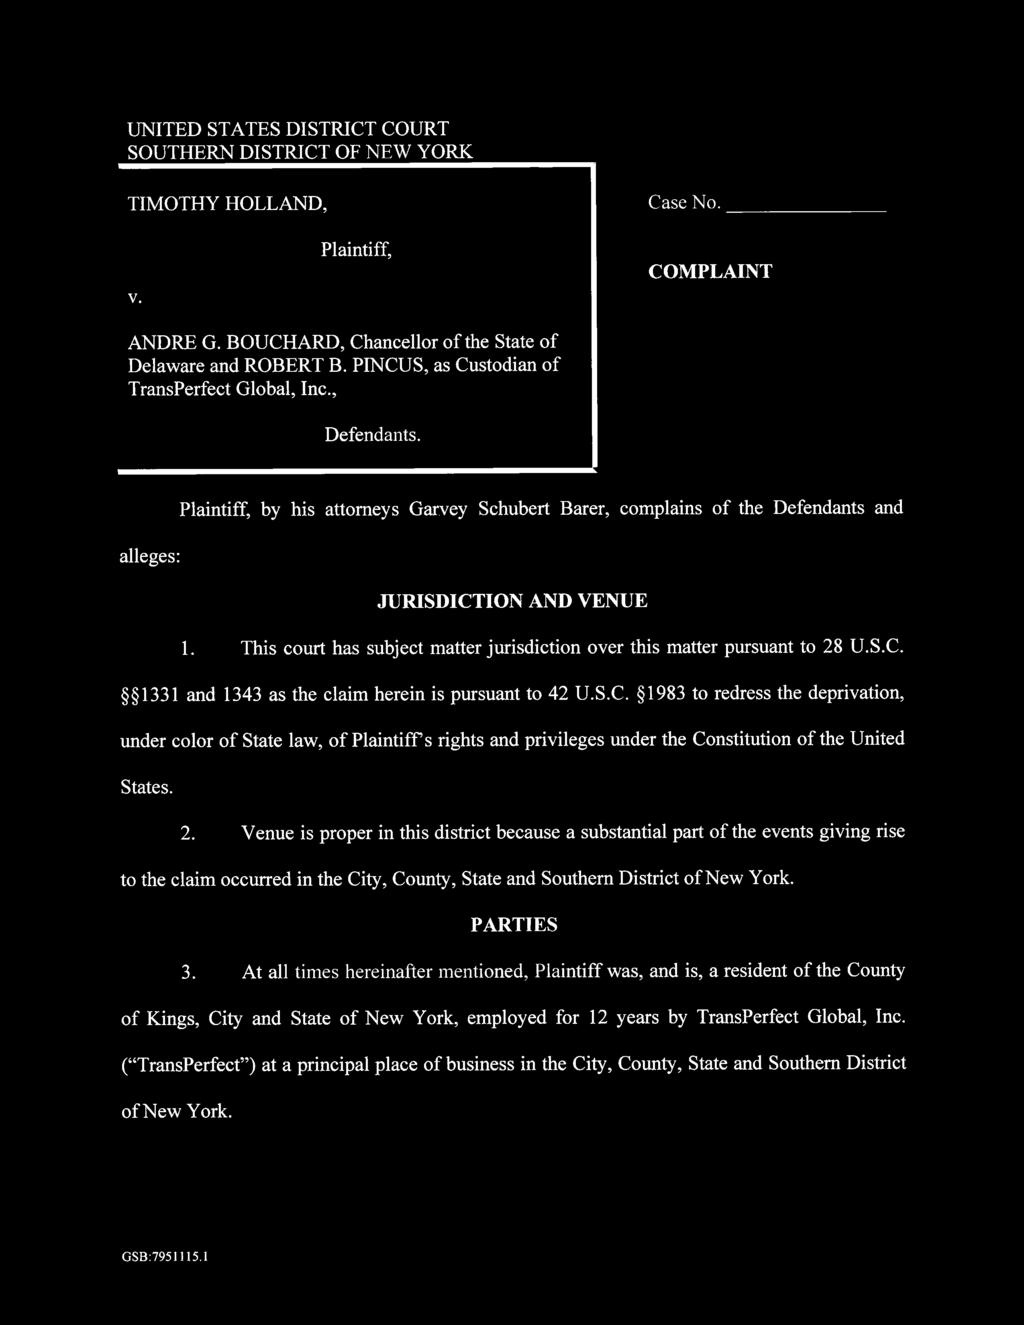 Plaintiff, by his attorneys Garvey Schubert Barer, complains of the Defendants and alleges: JURISDICTION AND VENUE 1. This court has subject matter jurisdiction over this matter pursuant to 28 U.S.C. 1331 and 1343 as the claim herein is pursuant to 42 U.